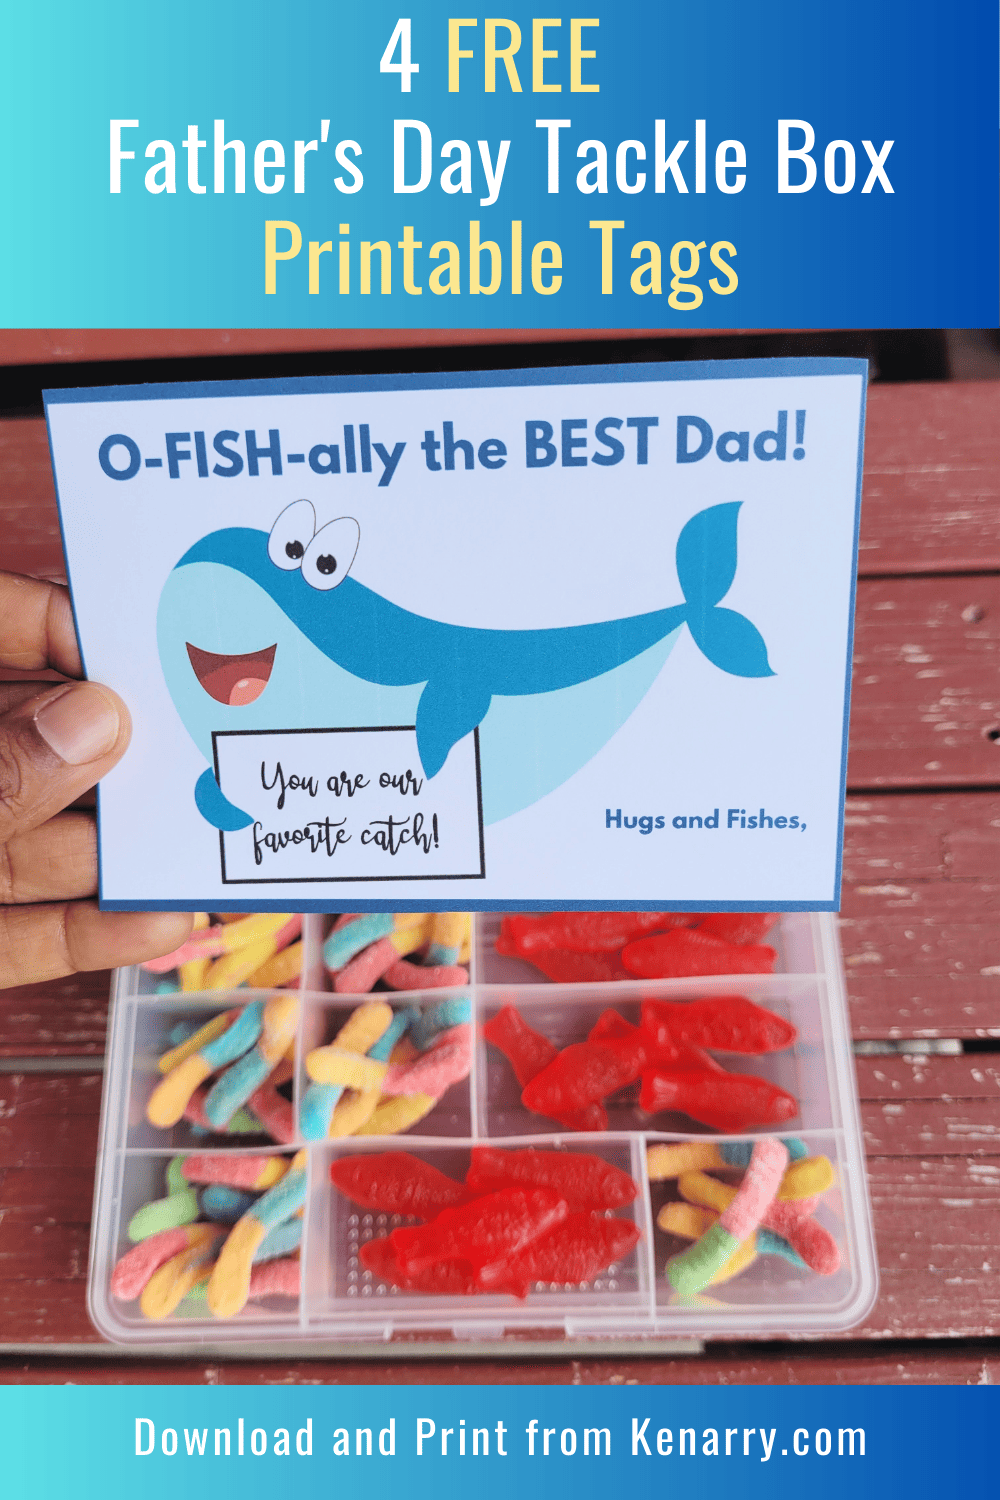 Father's Day tackle box printable tag that reads 